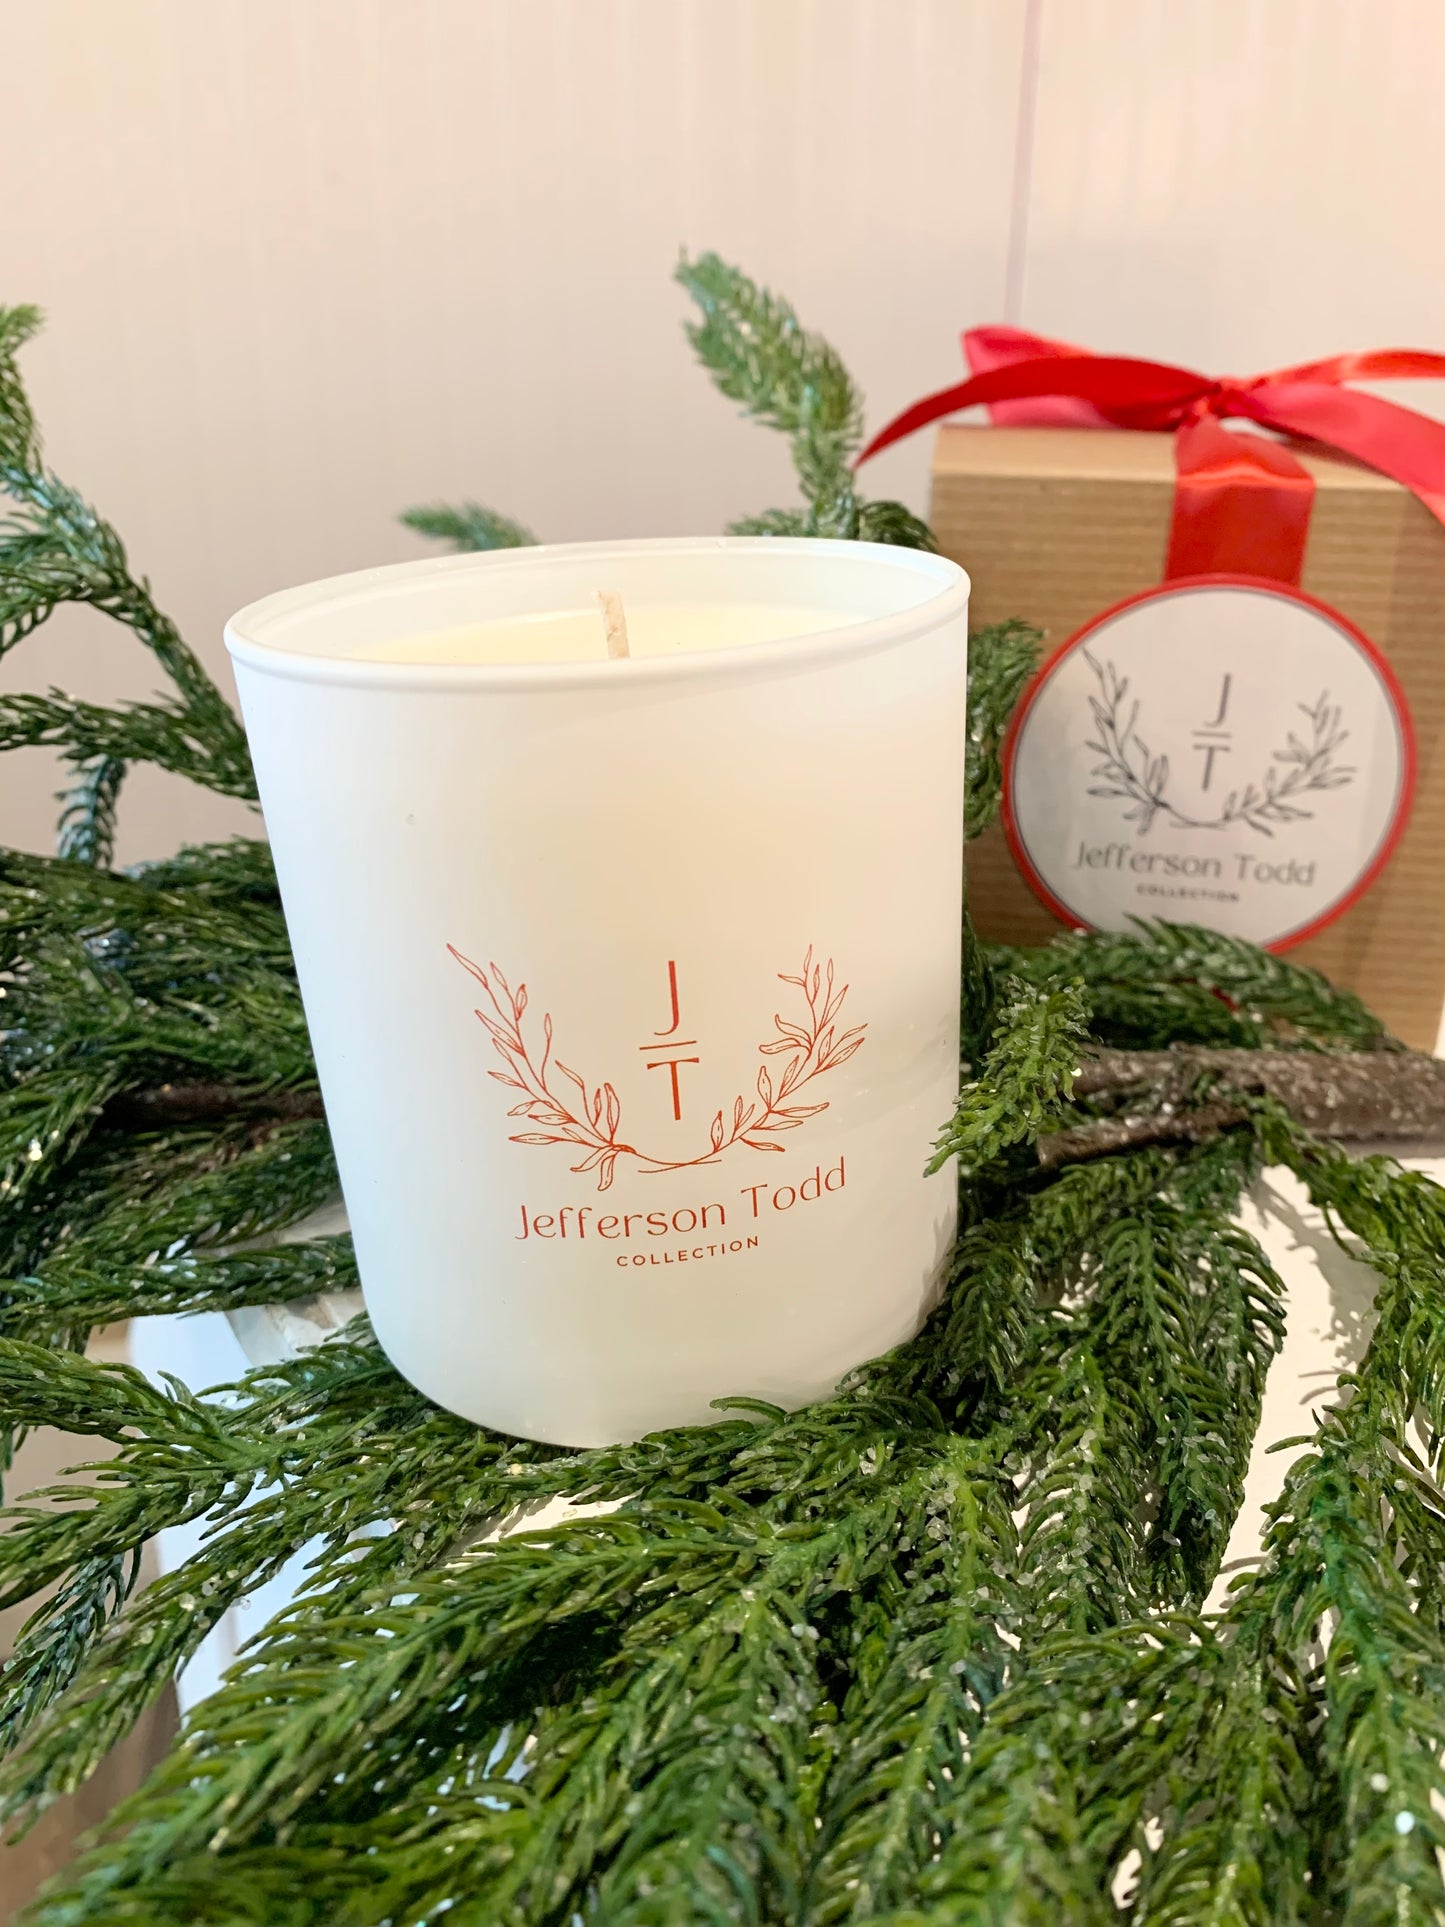 Jefferson Todd Collection Holiday Candle